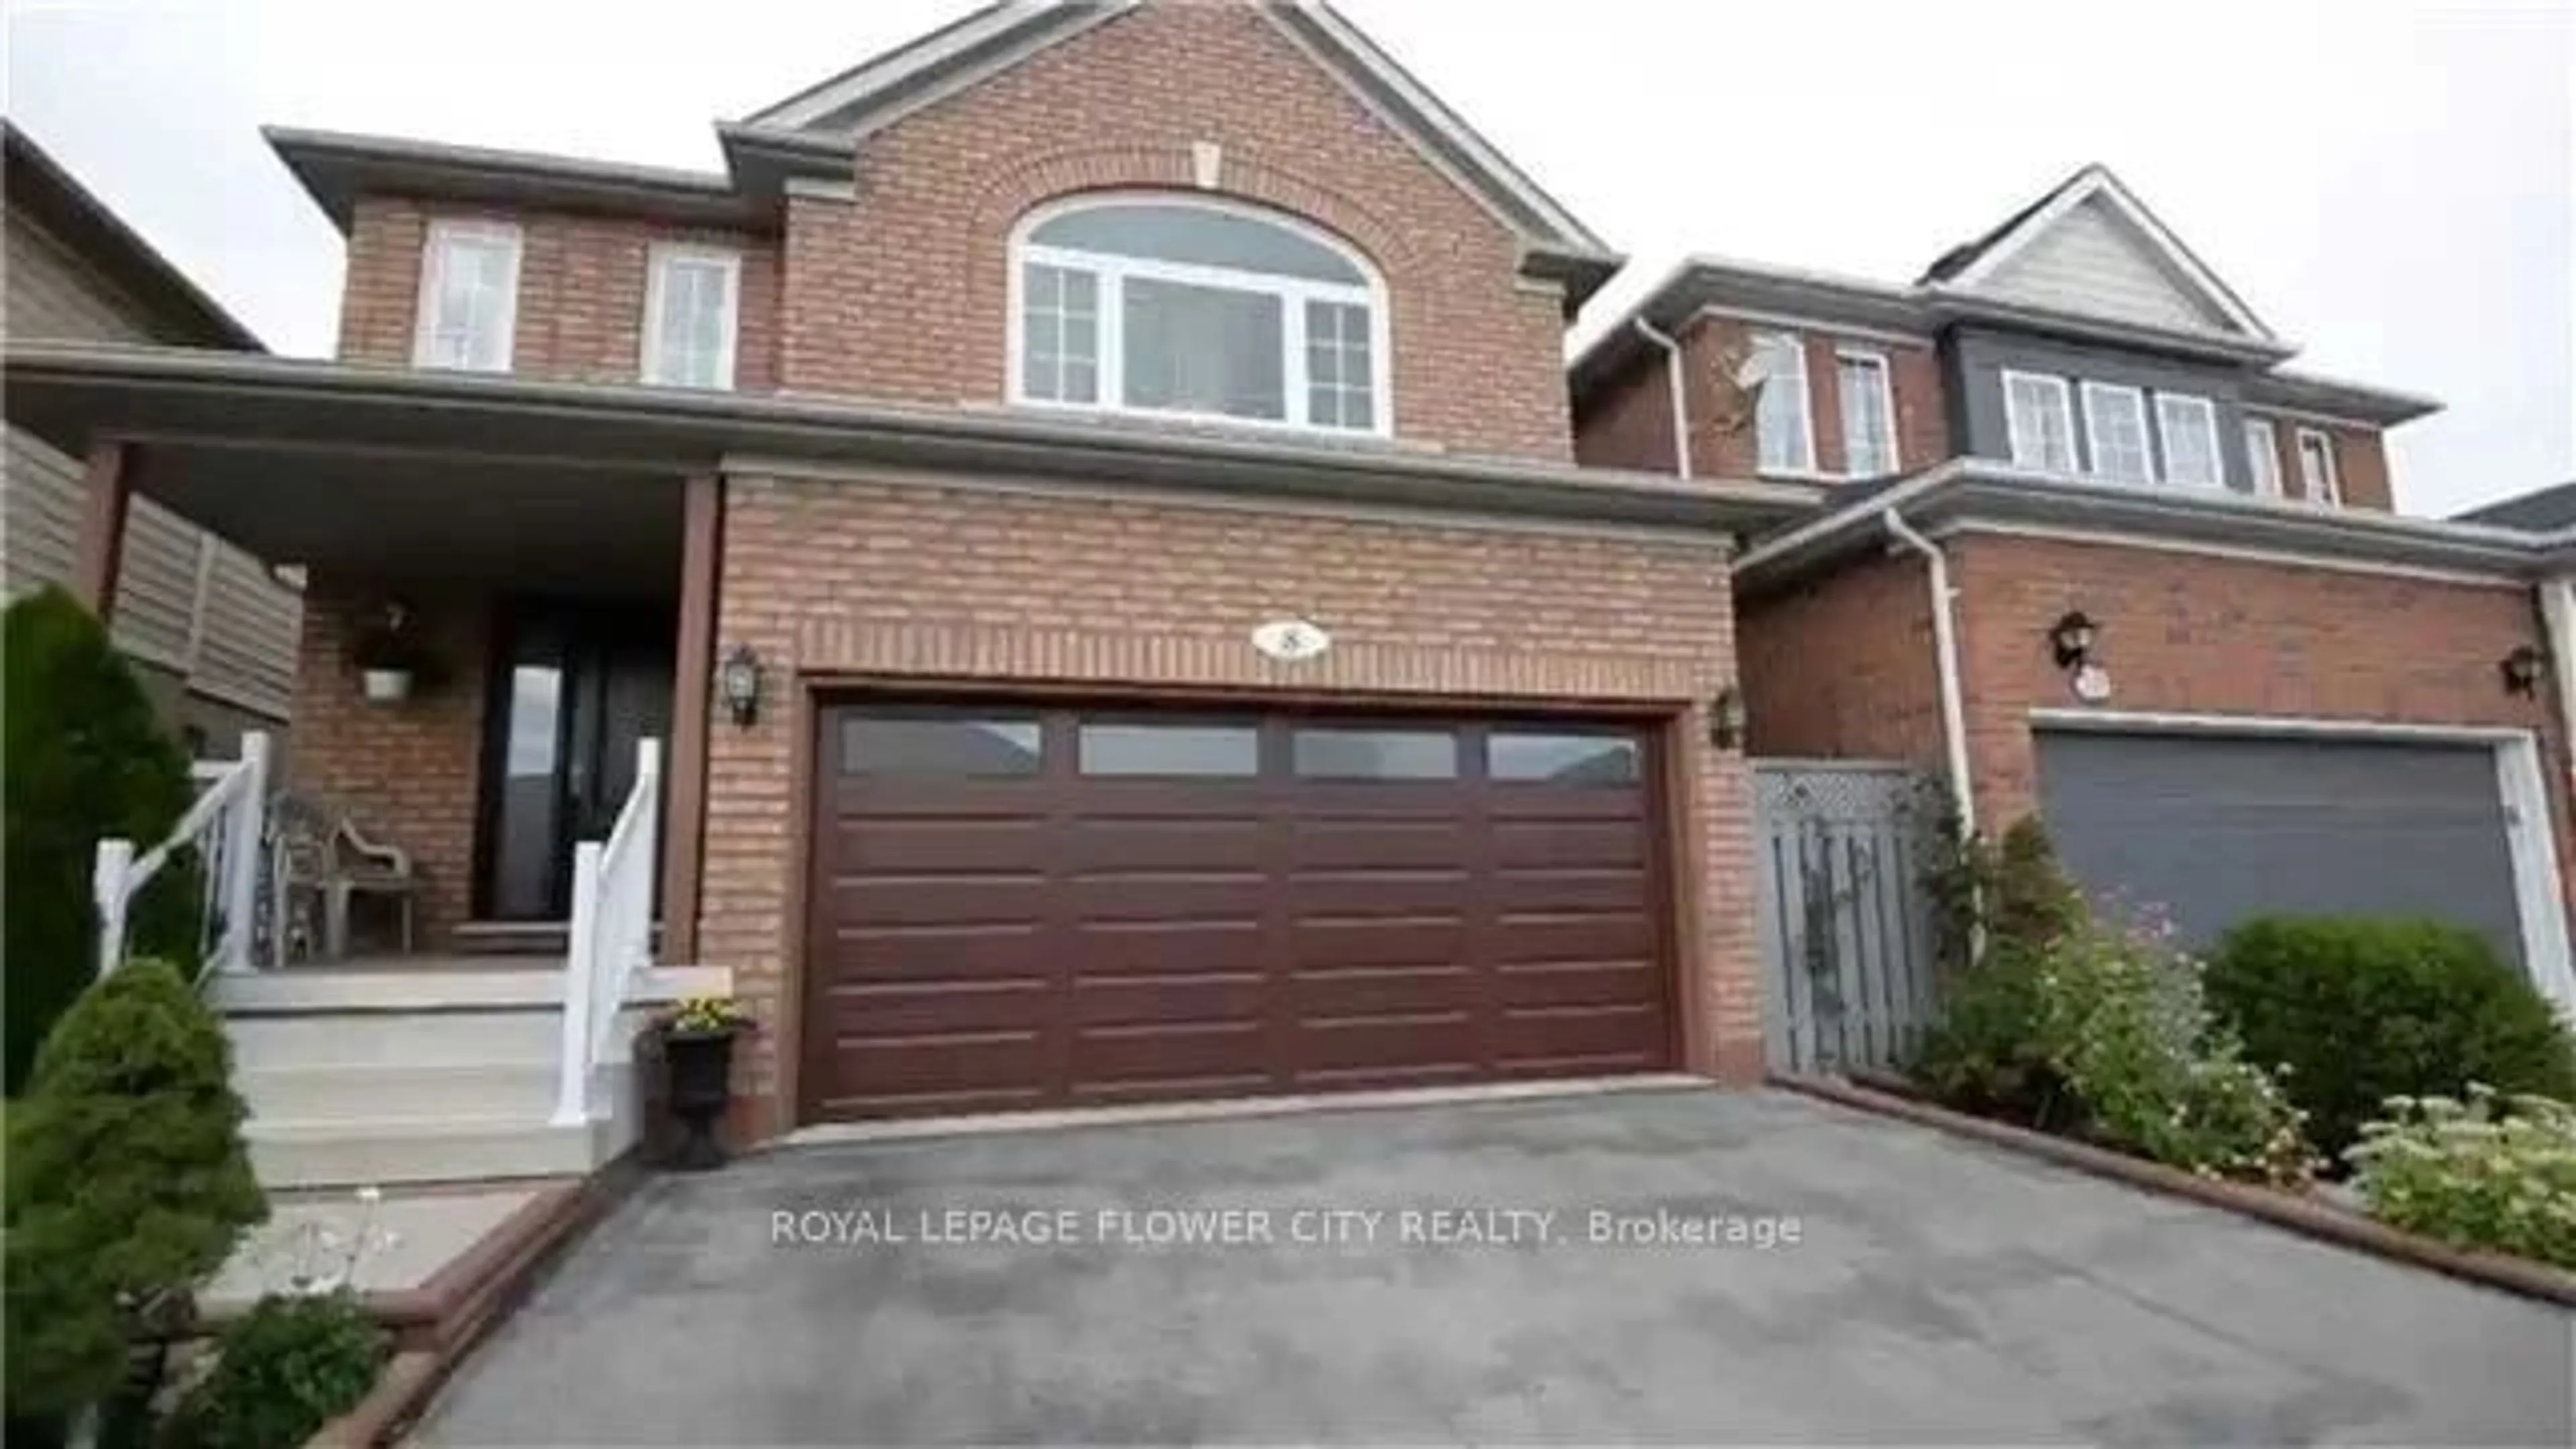 Home with brick exterior material for 8 Sheepberry Terr, Brampton Ontario L7A 2B6